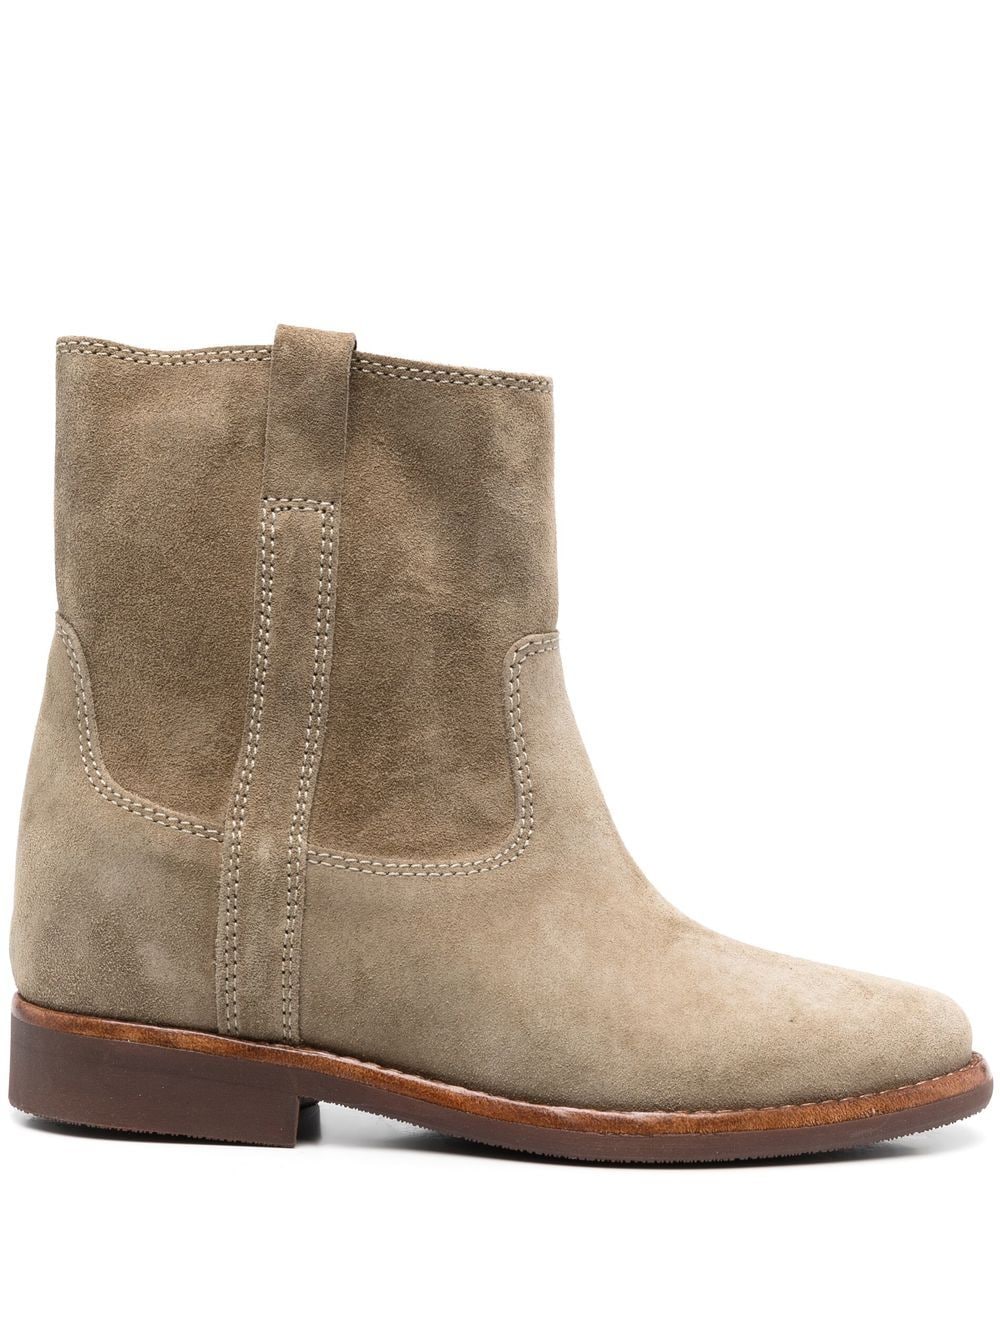 ISABEL MARANT Susee suede ankle boots - Green von ISABEL MARANT